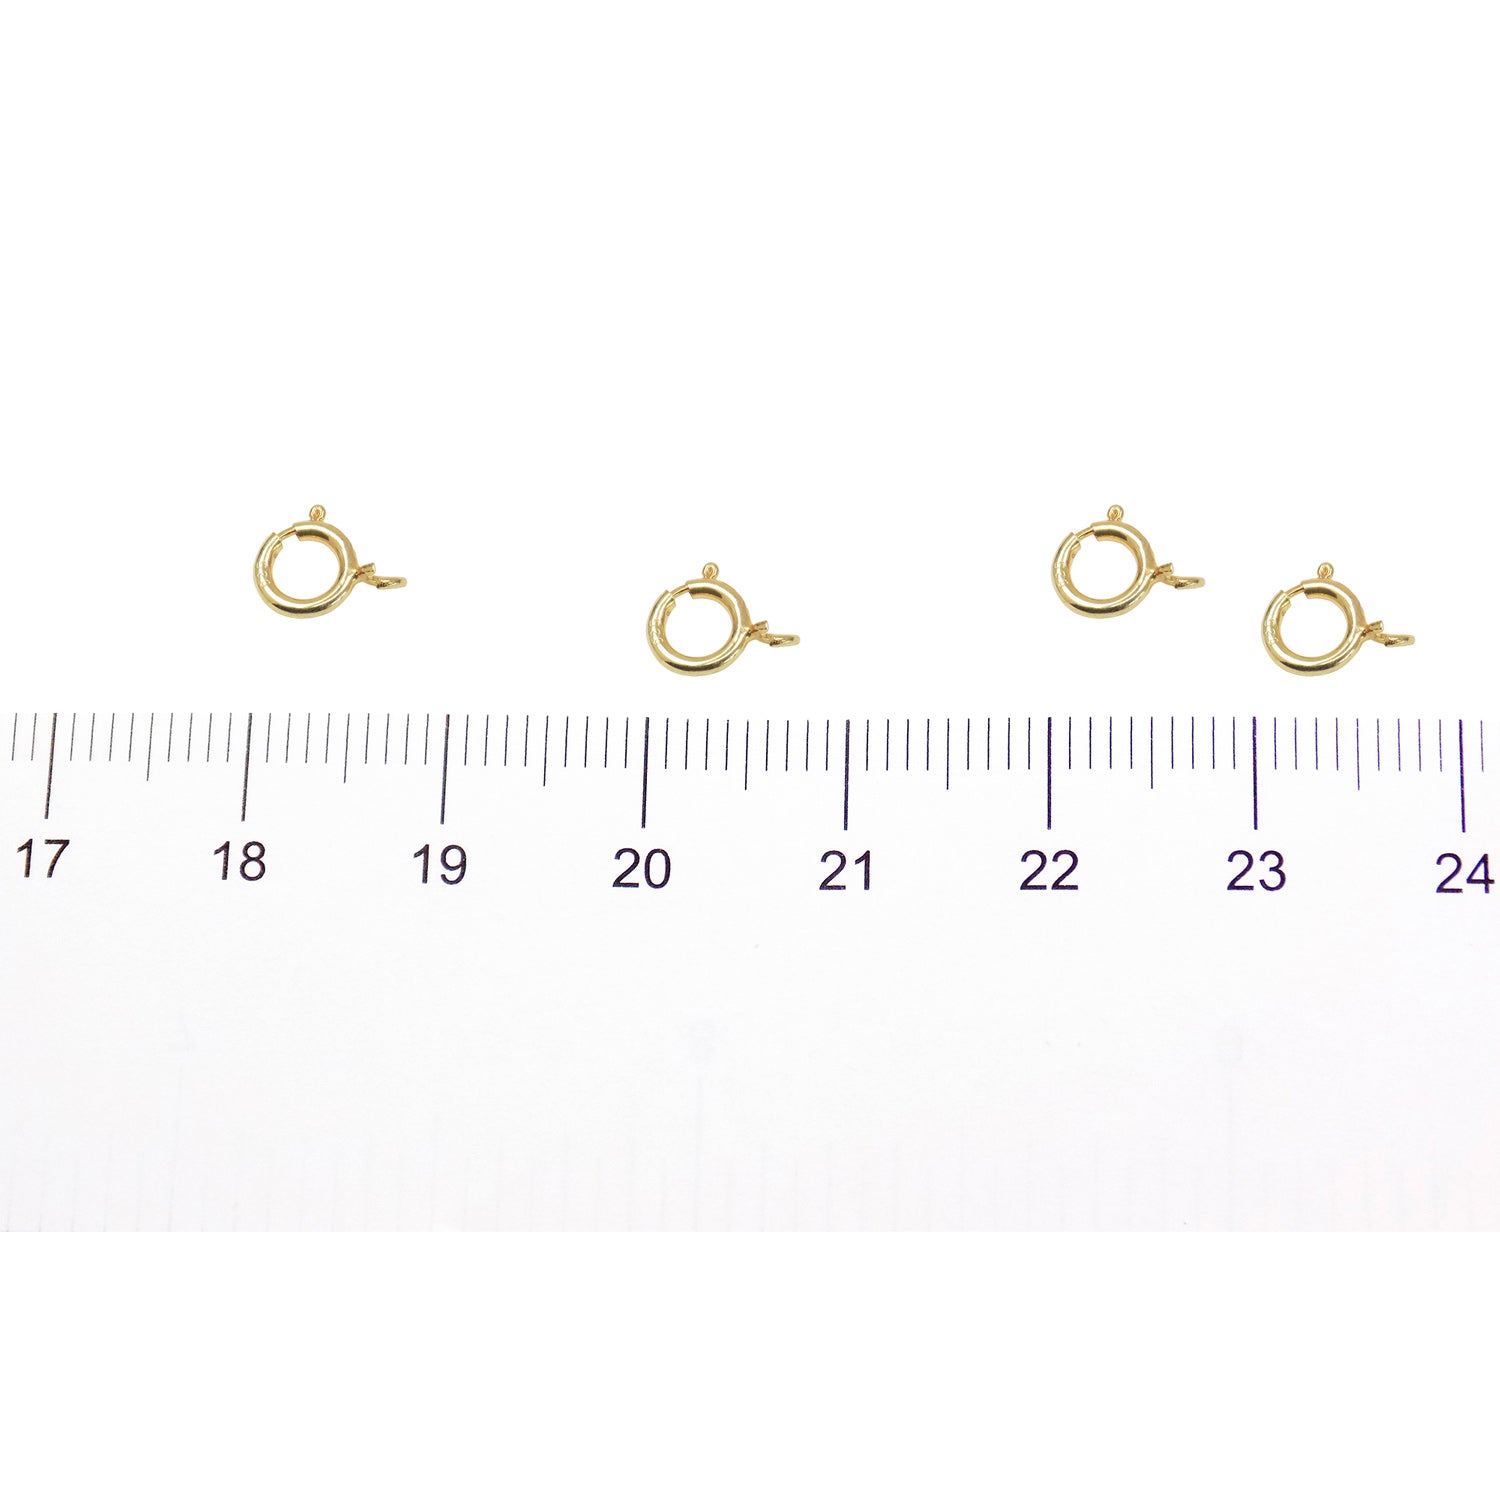 Spring Ring Clasp 5.5mm (5 PCS) 22K Gold Plated Over 925 Sterling Silver